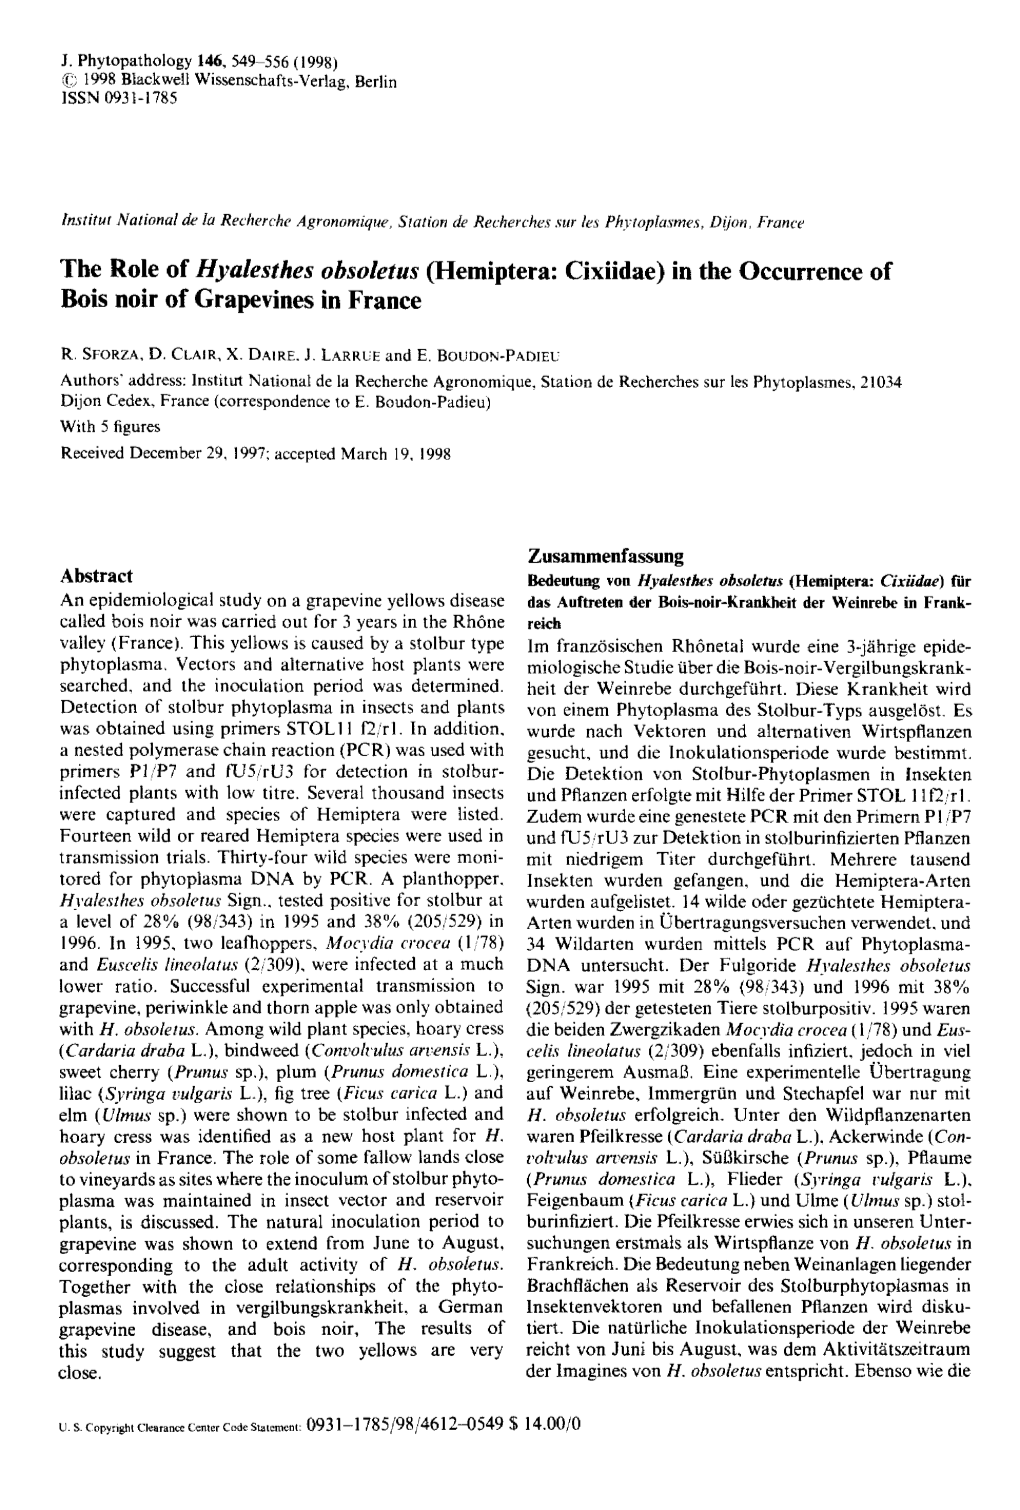 The Role of Hyalesthes Obsoletus (Hemiptera: Cixiidae) in the Occurrence of Bois Noir of Grapevines in France